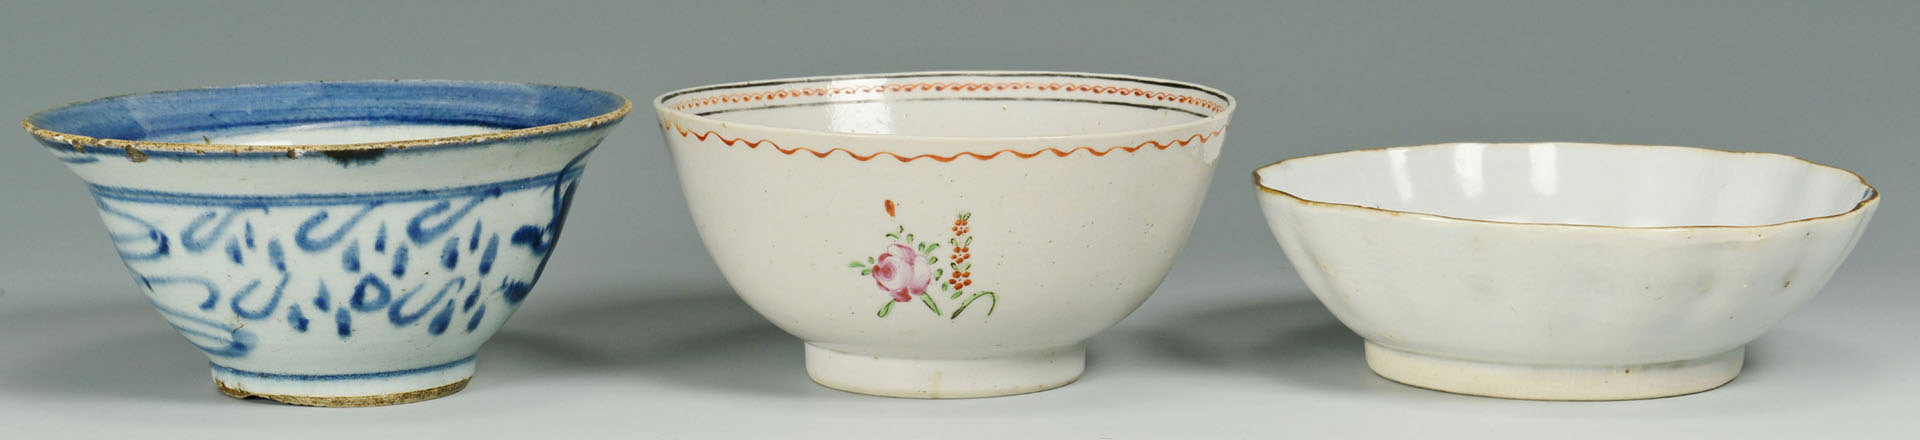 Lot 3088299: Group of Chinese Ceramics, 18th-early 20th c.